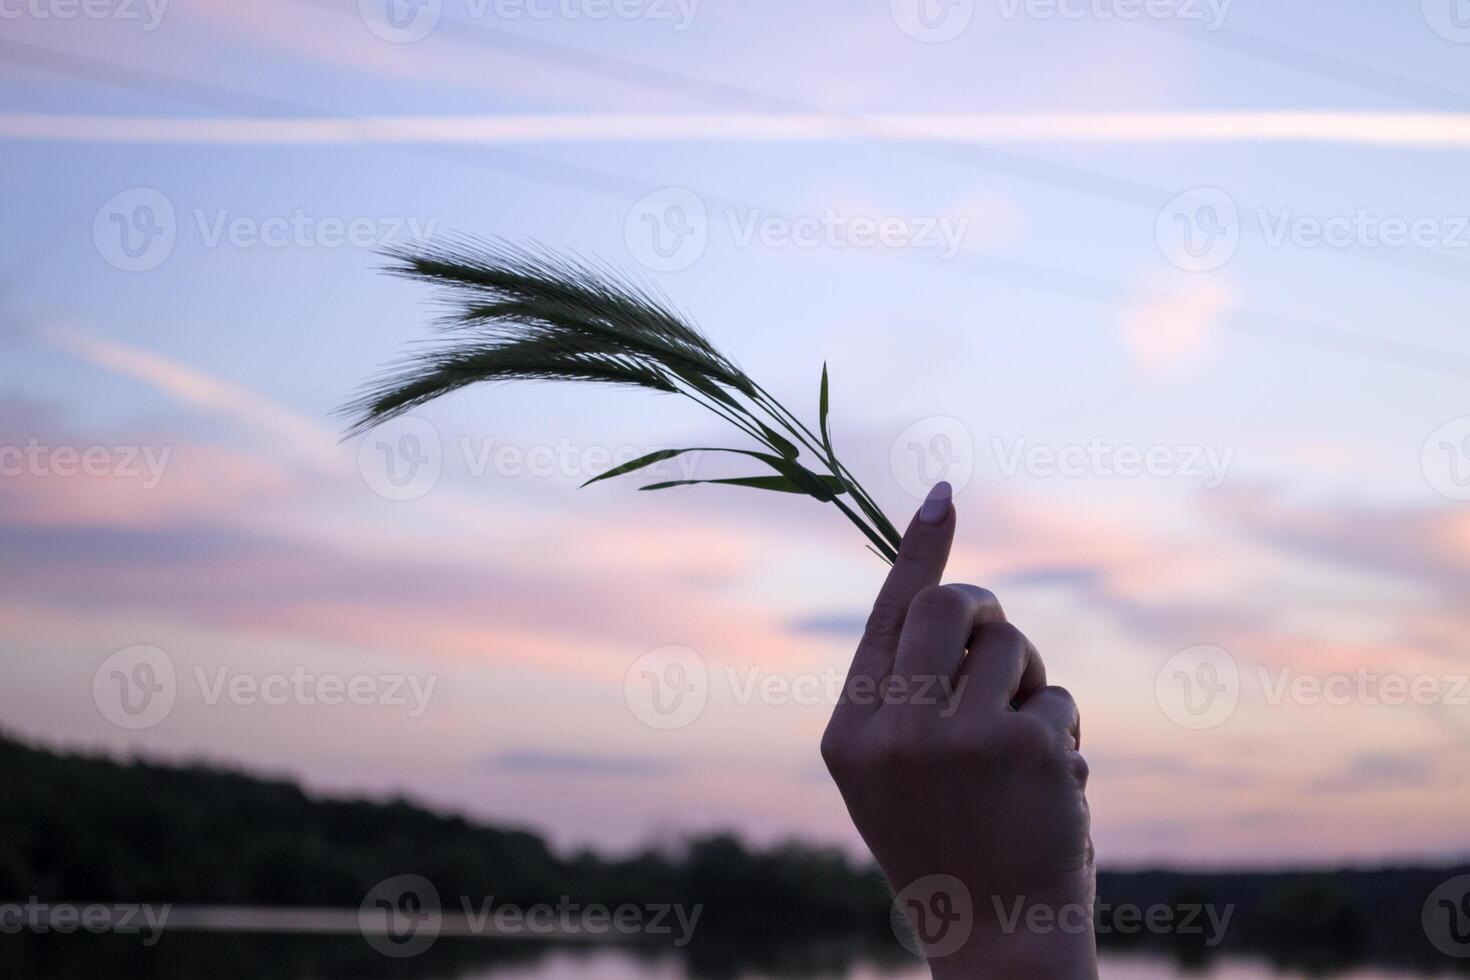 Spikelet in a woman's hand against scenic sunset photo